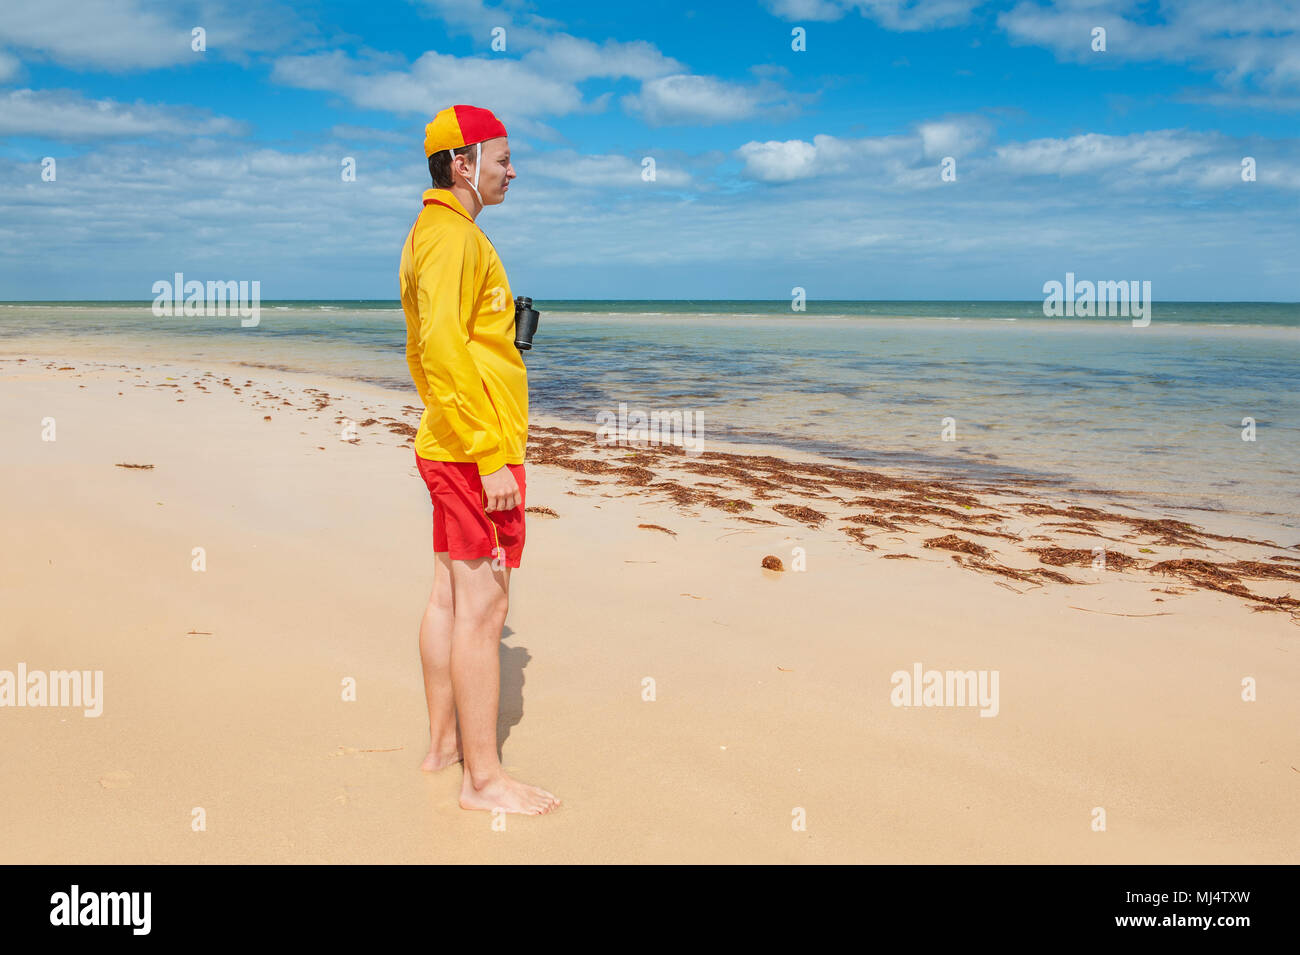 young man  lifesaver  watching the situation on the sea Stock Photo